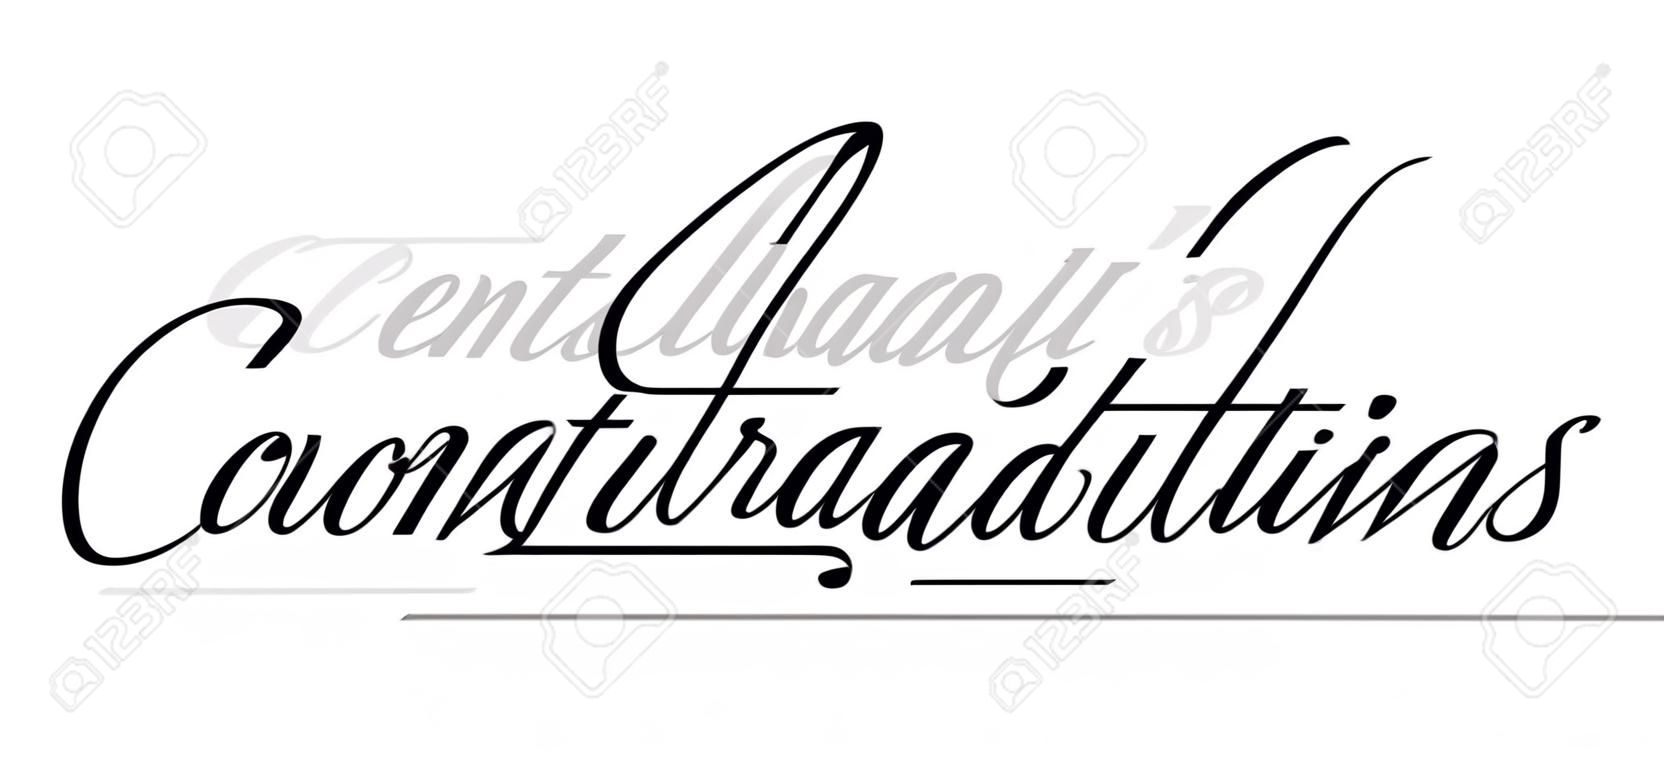 Underscore handwritten text "Congratulations" with shadow. Hand drawn calligraphy lettering